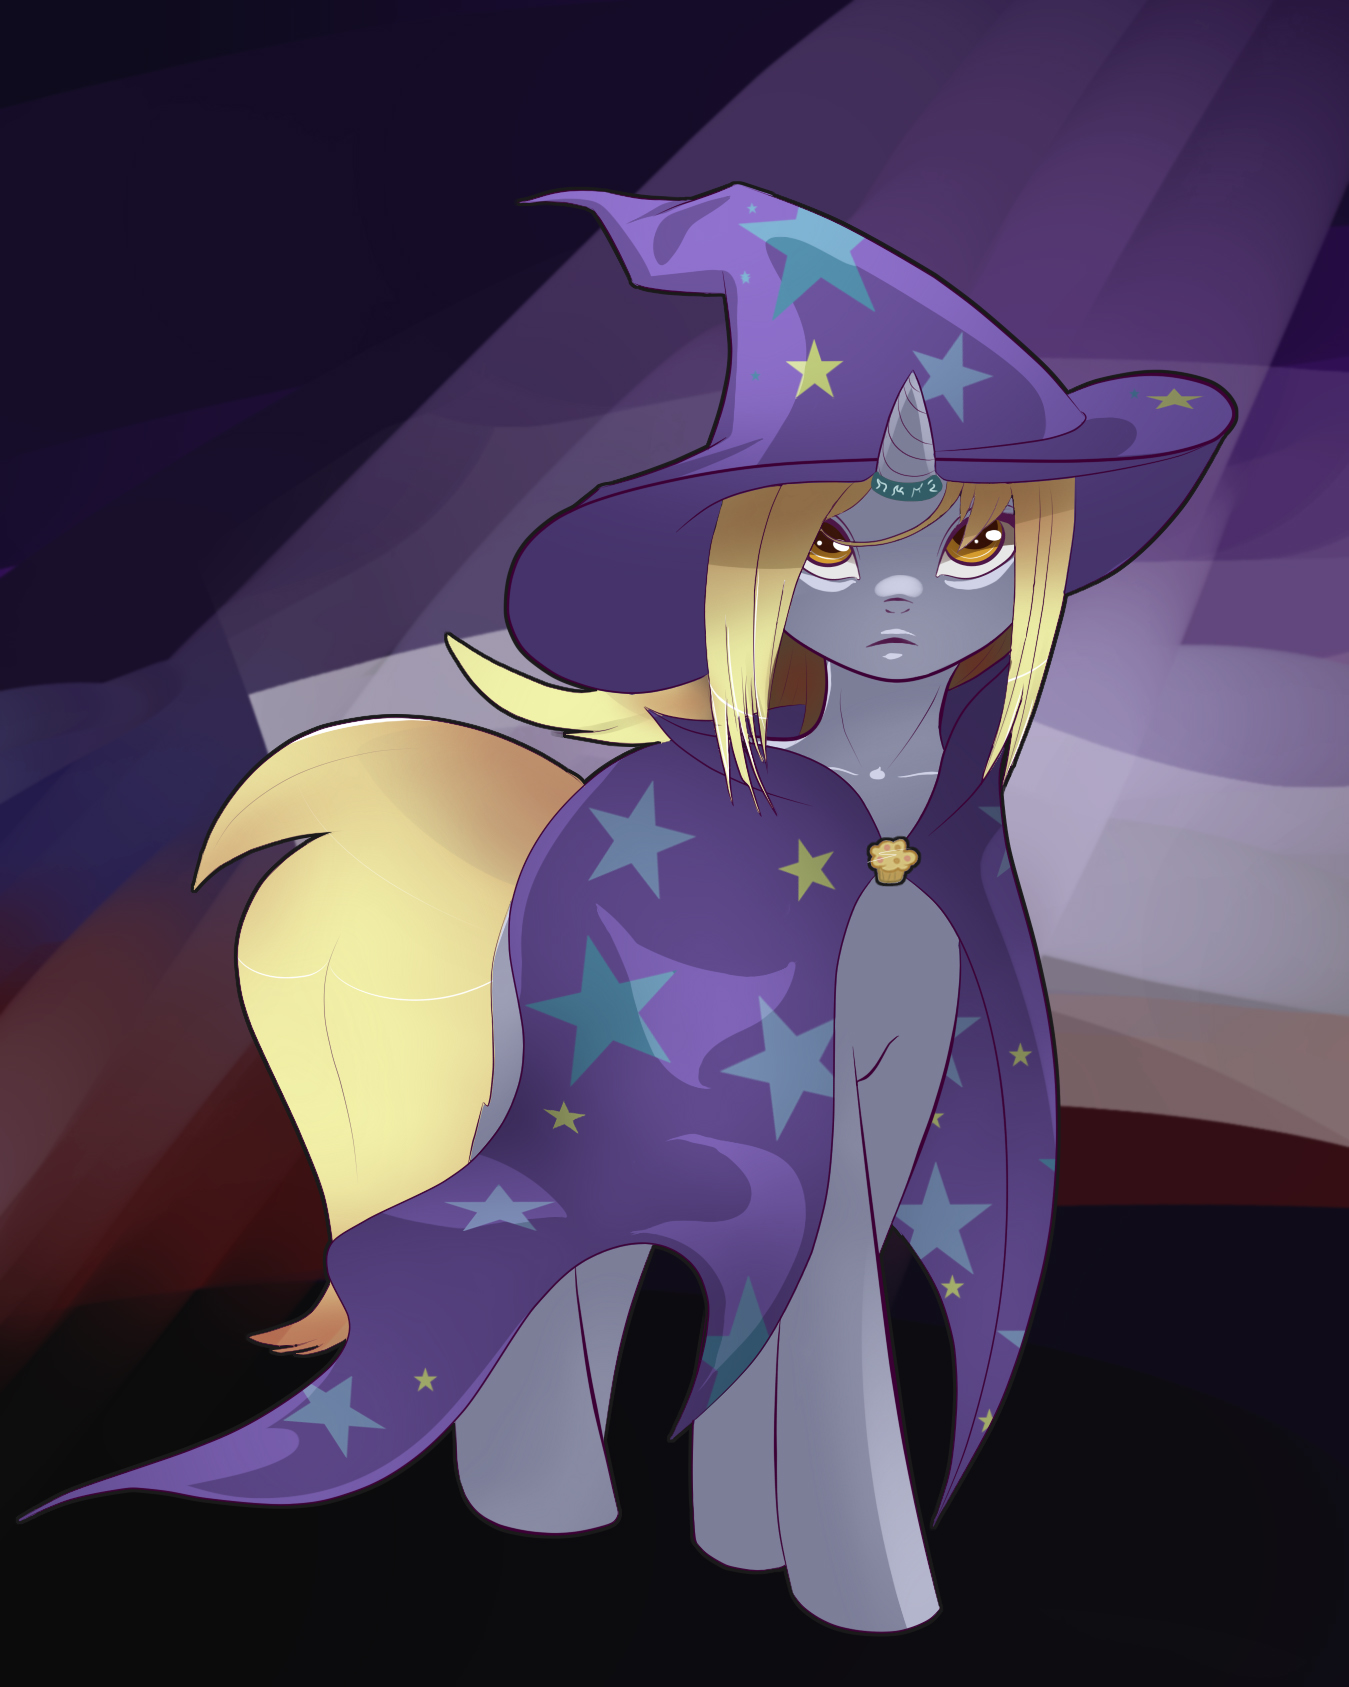 the_great_and_powerful_derpy_by_sosweetntasty-d4rypk9.jpg